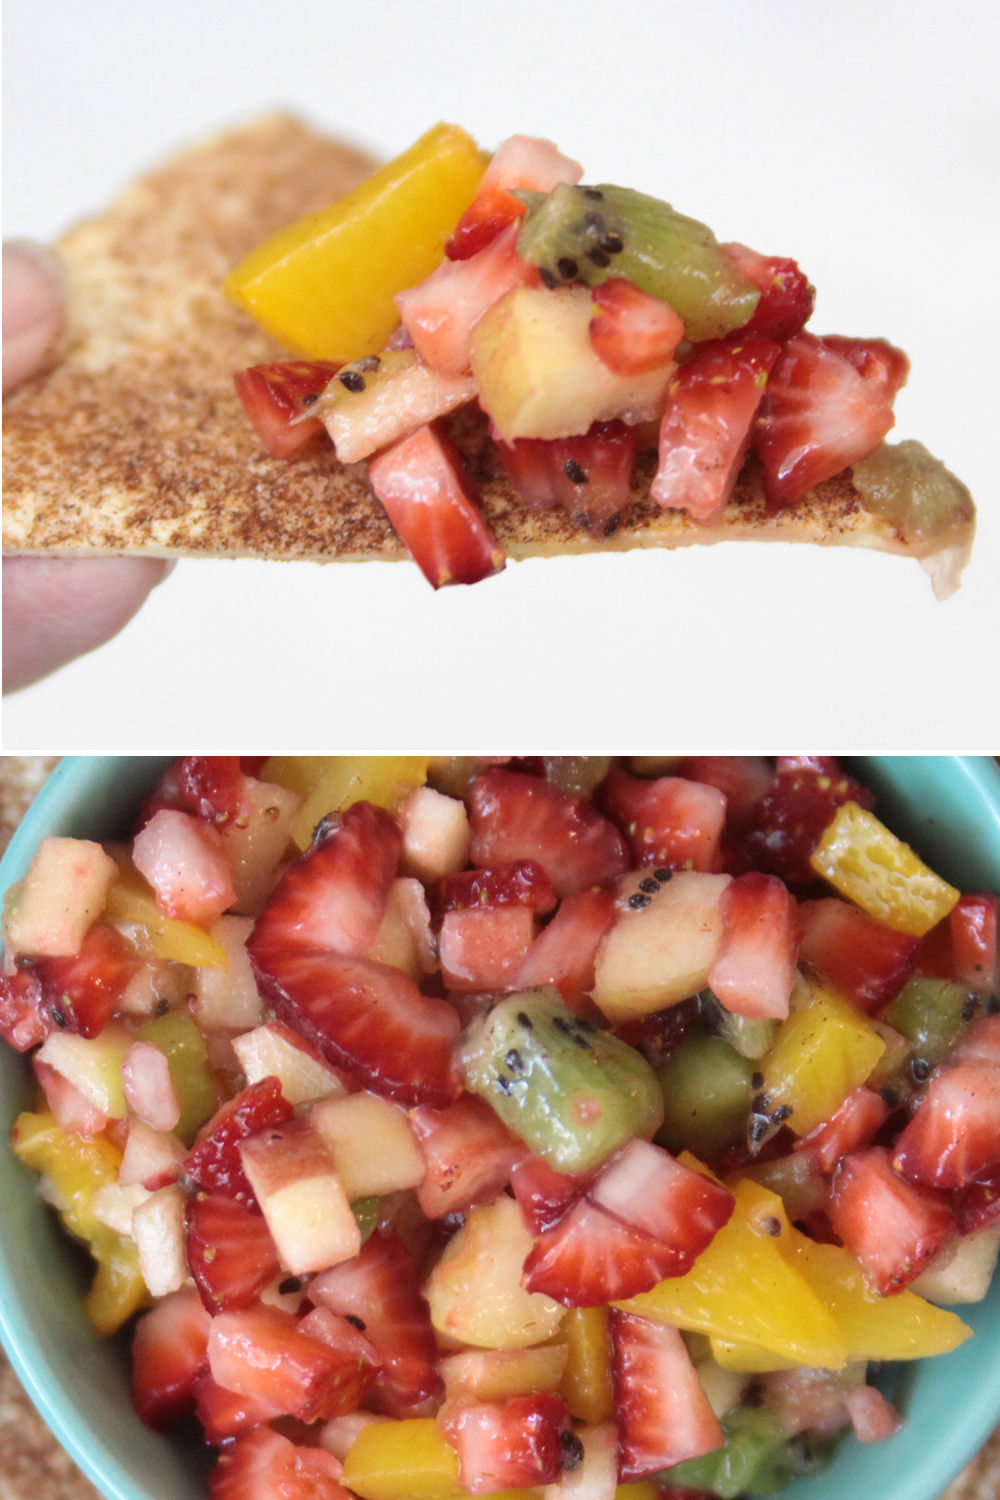 This fresh fruit salsa recipe is a super easy and healthy snack!